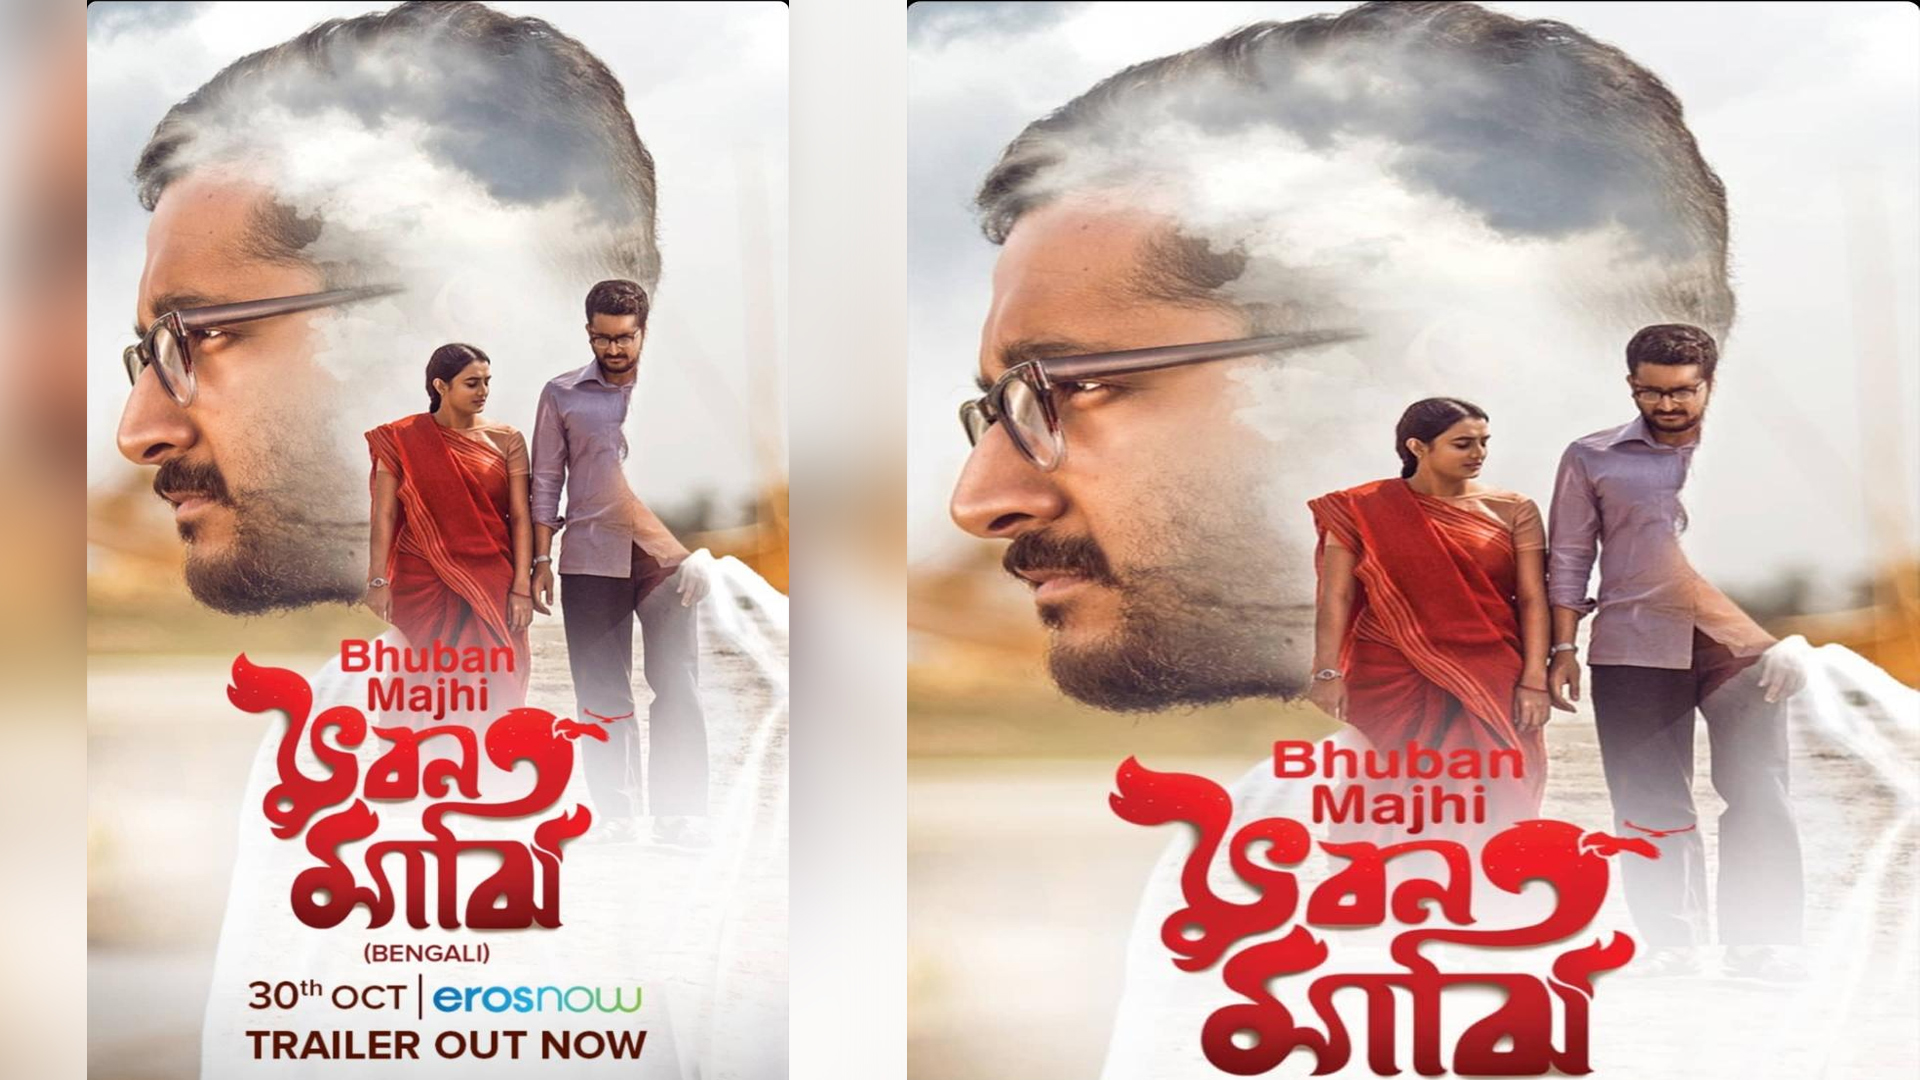 Eros Now brings forth an enthralling tale of the Liberation war- ‘Bhuban Majhi’ starring Parambrata Chattopadhyay and Aparna Ghosh which is all set to release on 30th October